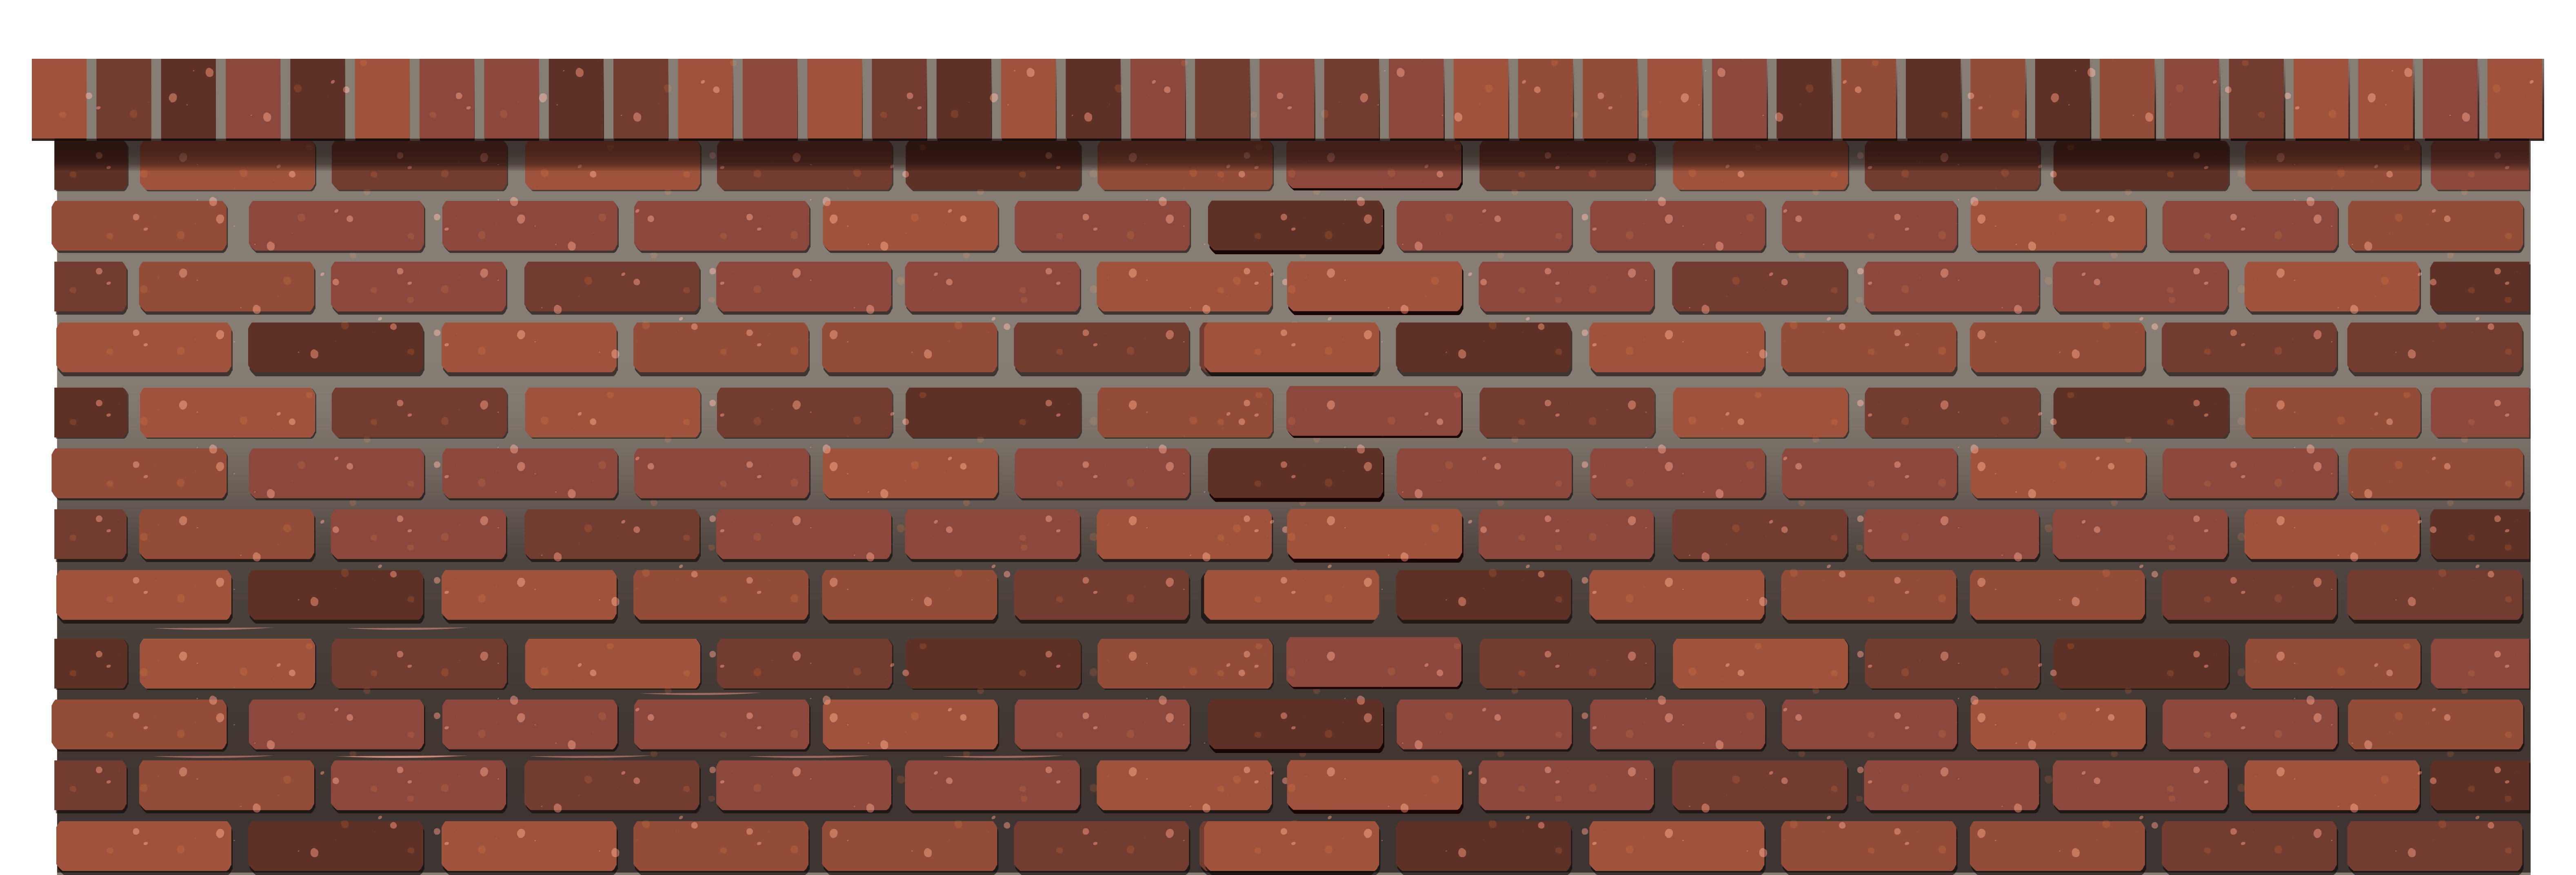 Free Brick Background Cliparts, Download Free Brick Background Cliparts